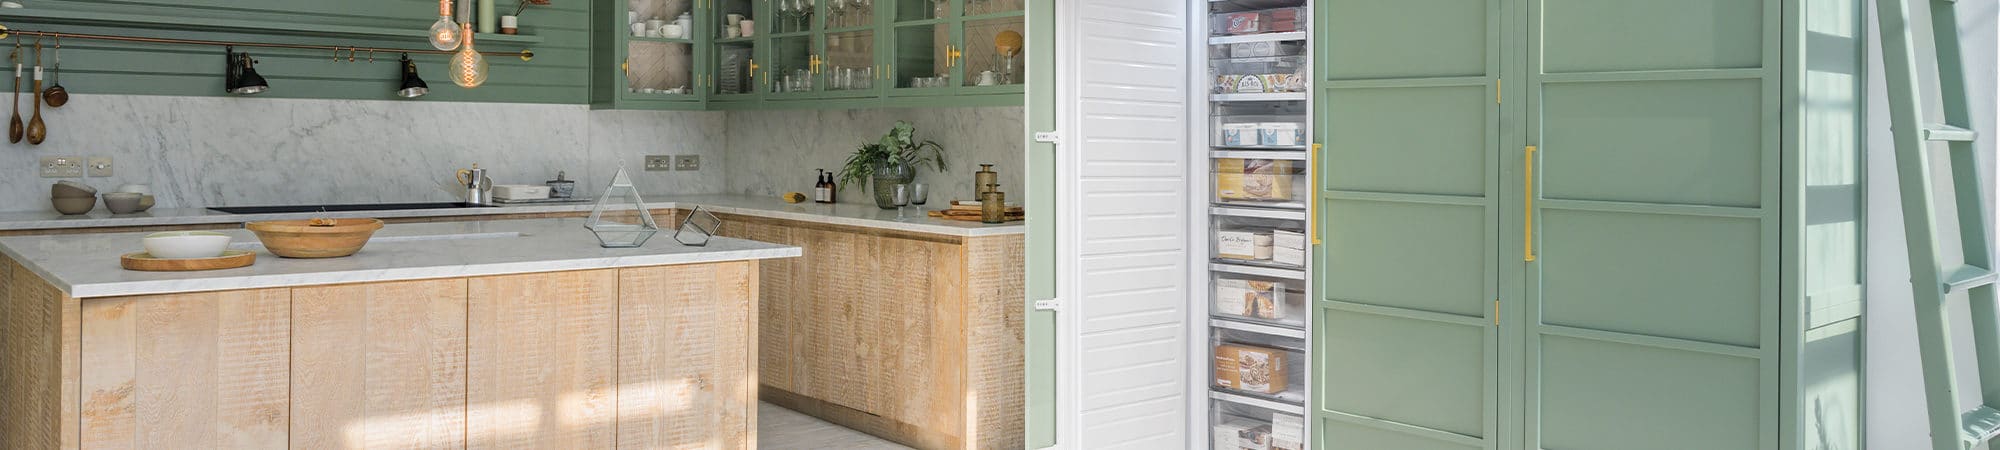 Integrated Freezer in green and wood kitchen